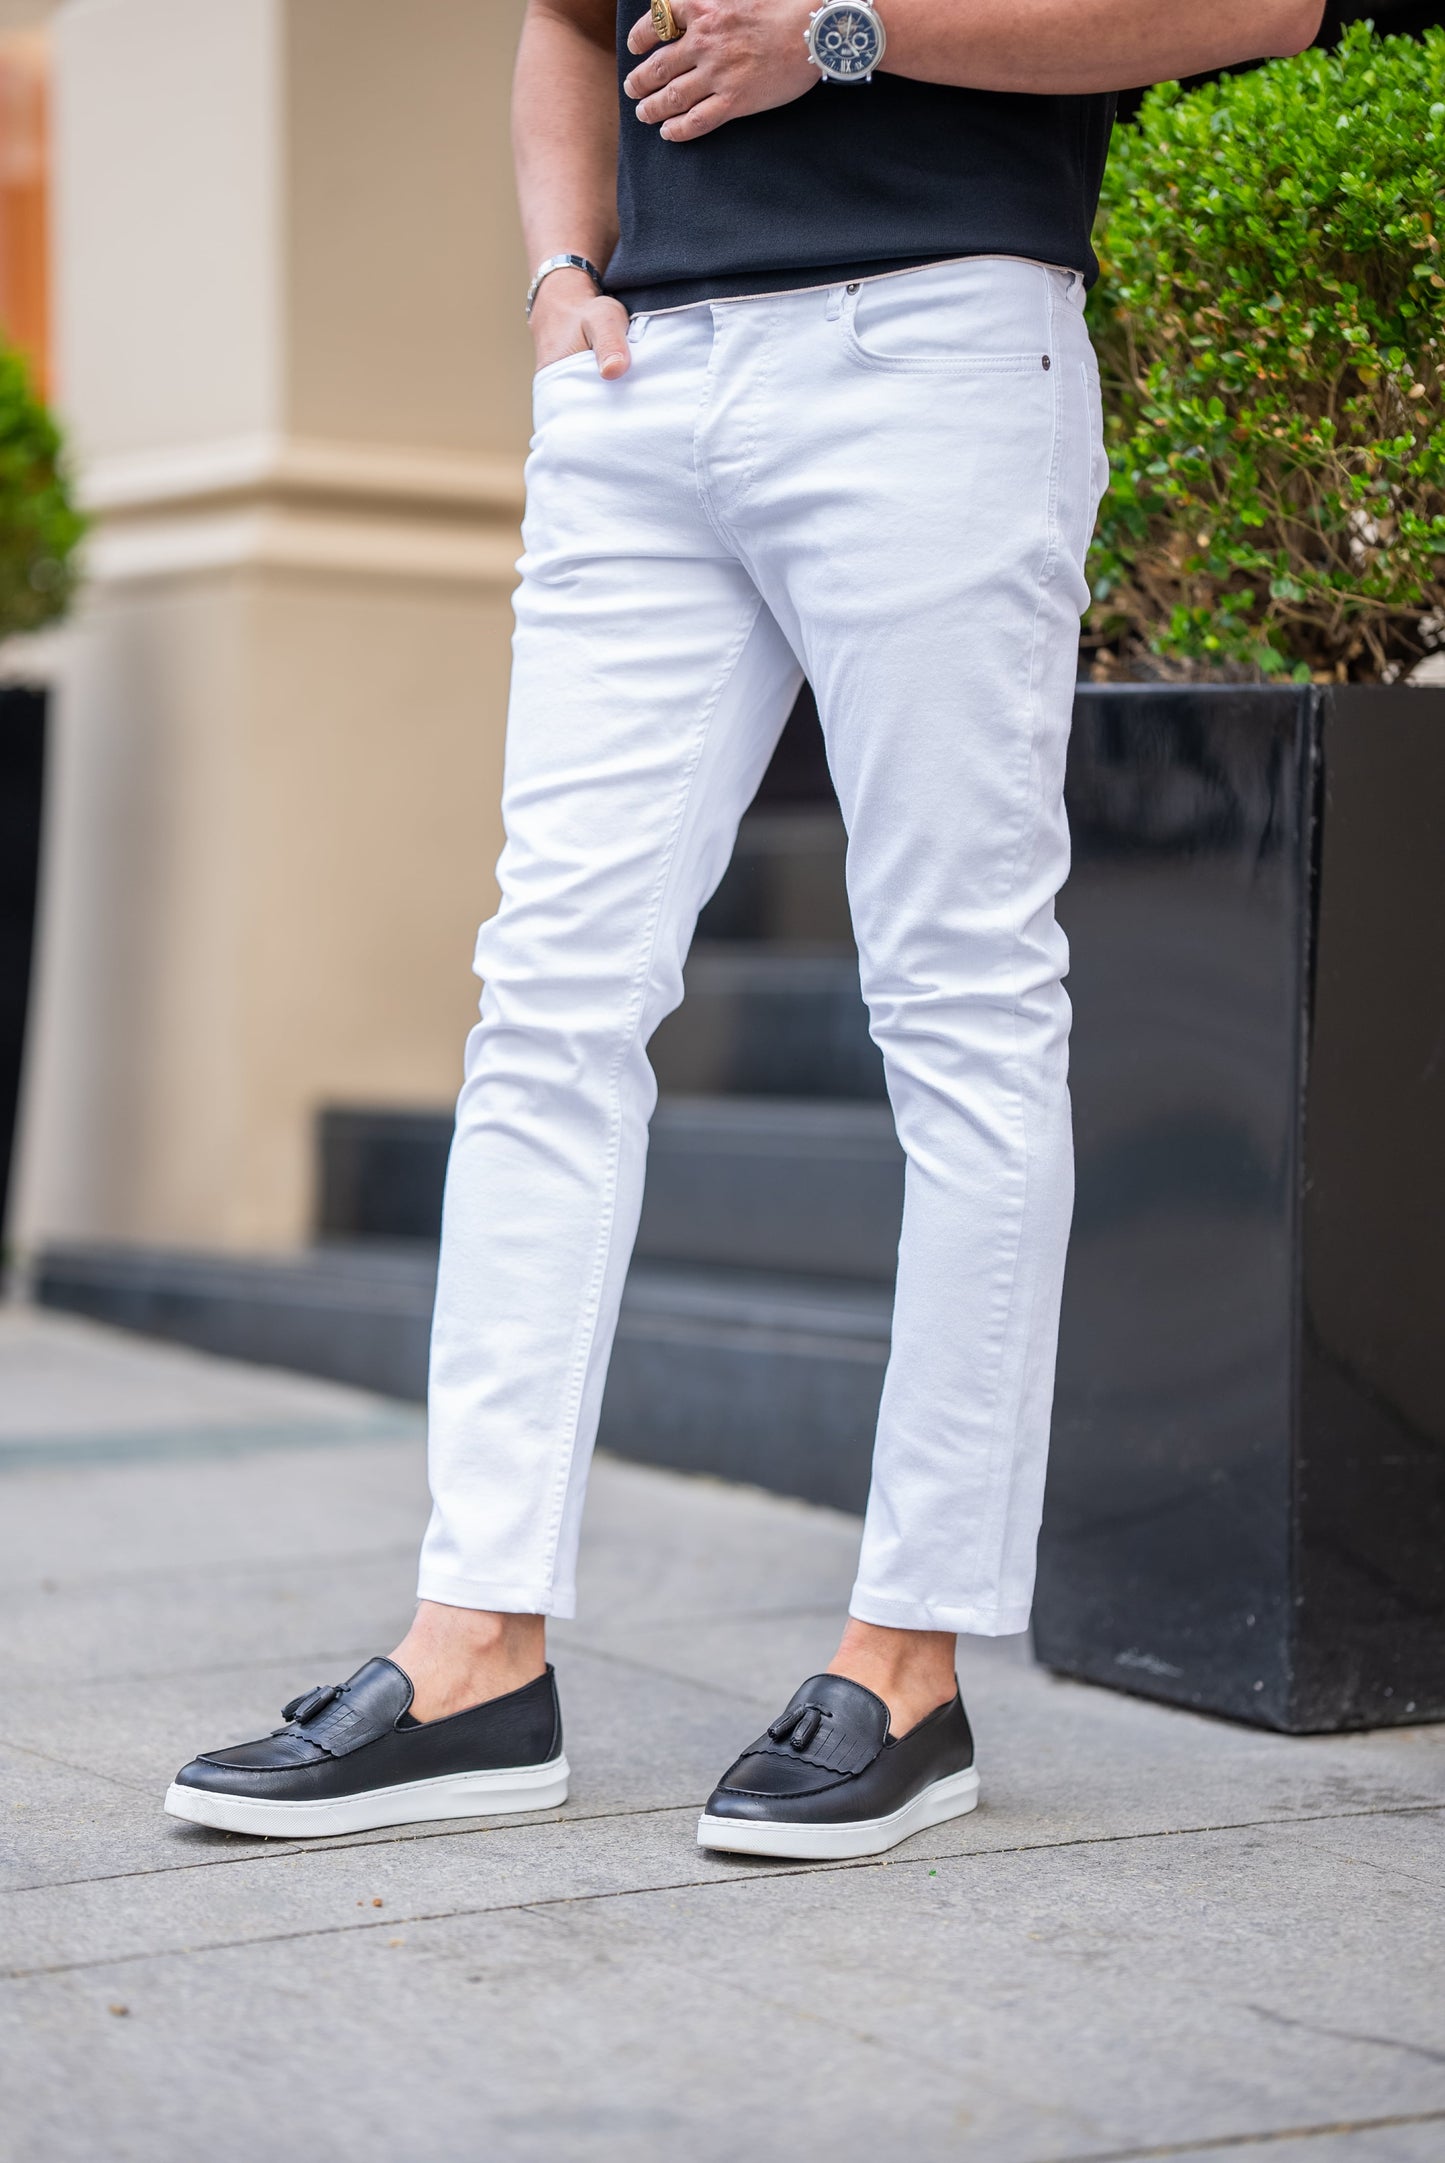 A White Jeans on display